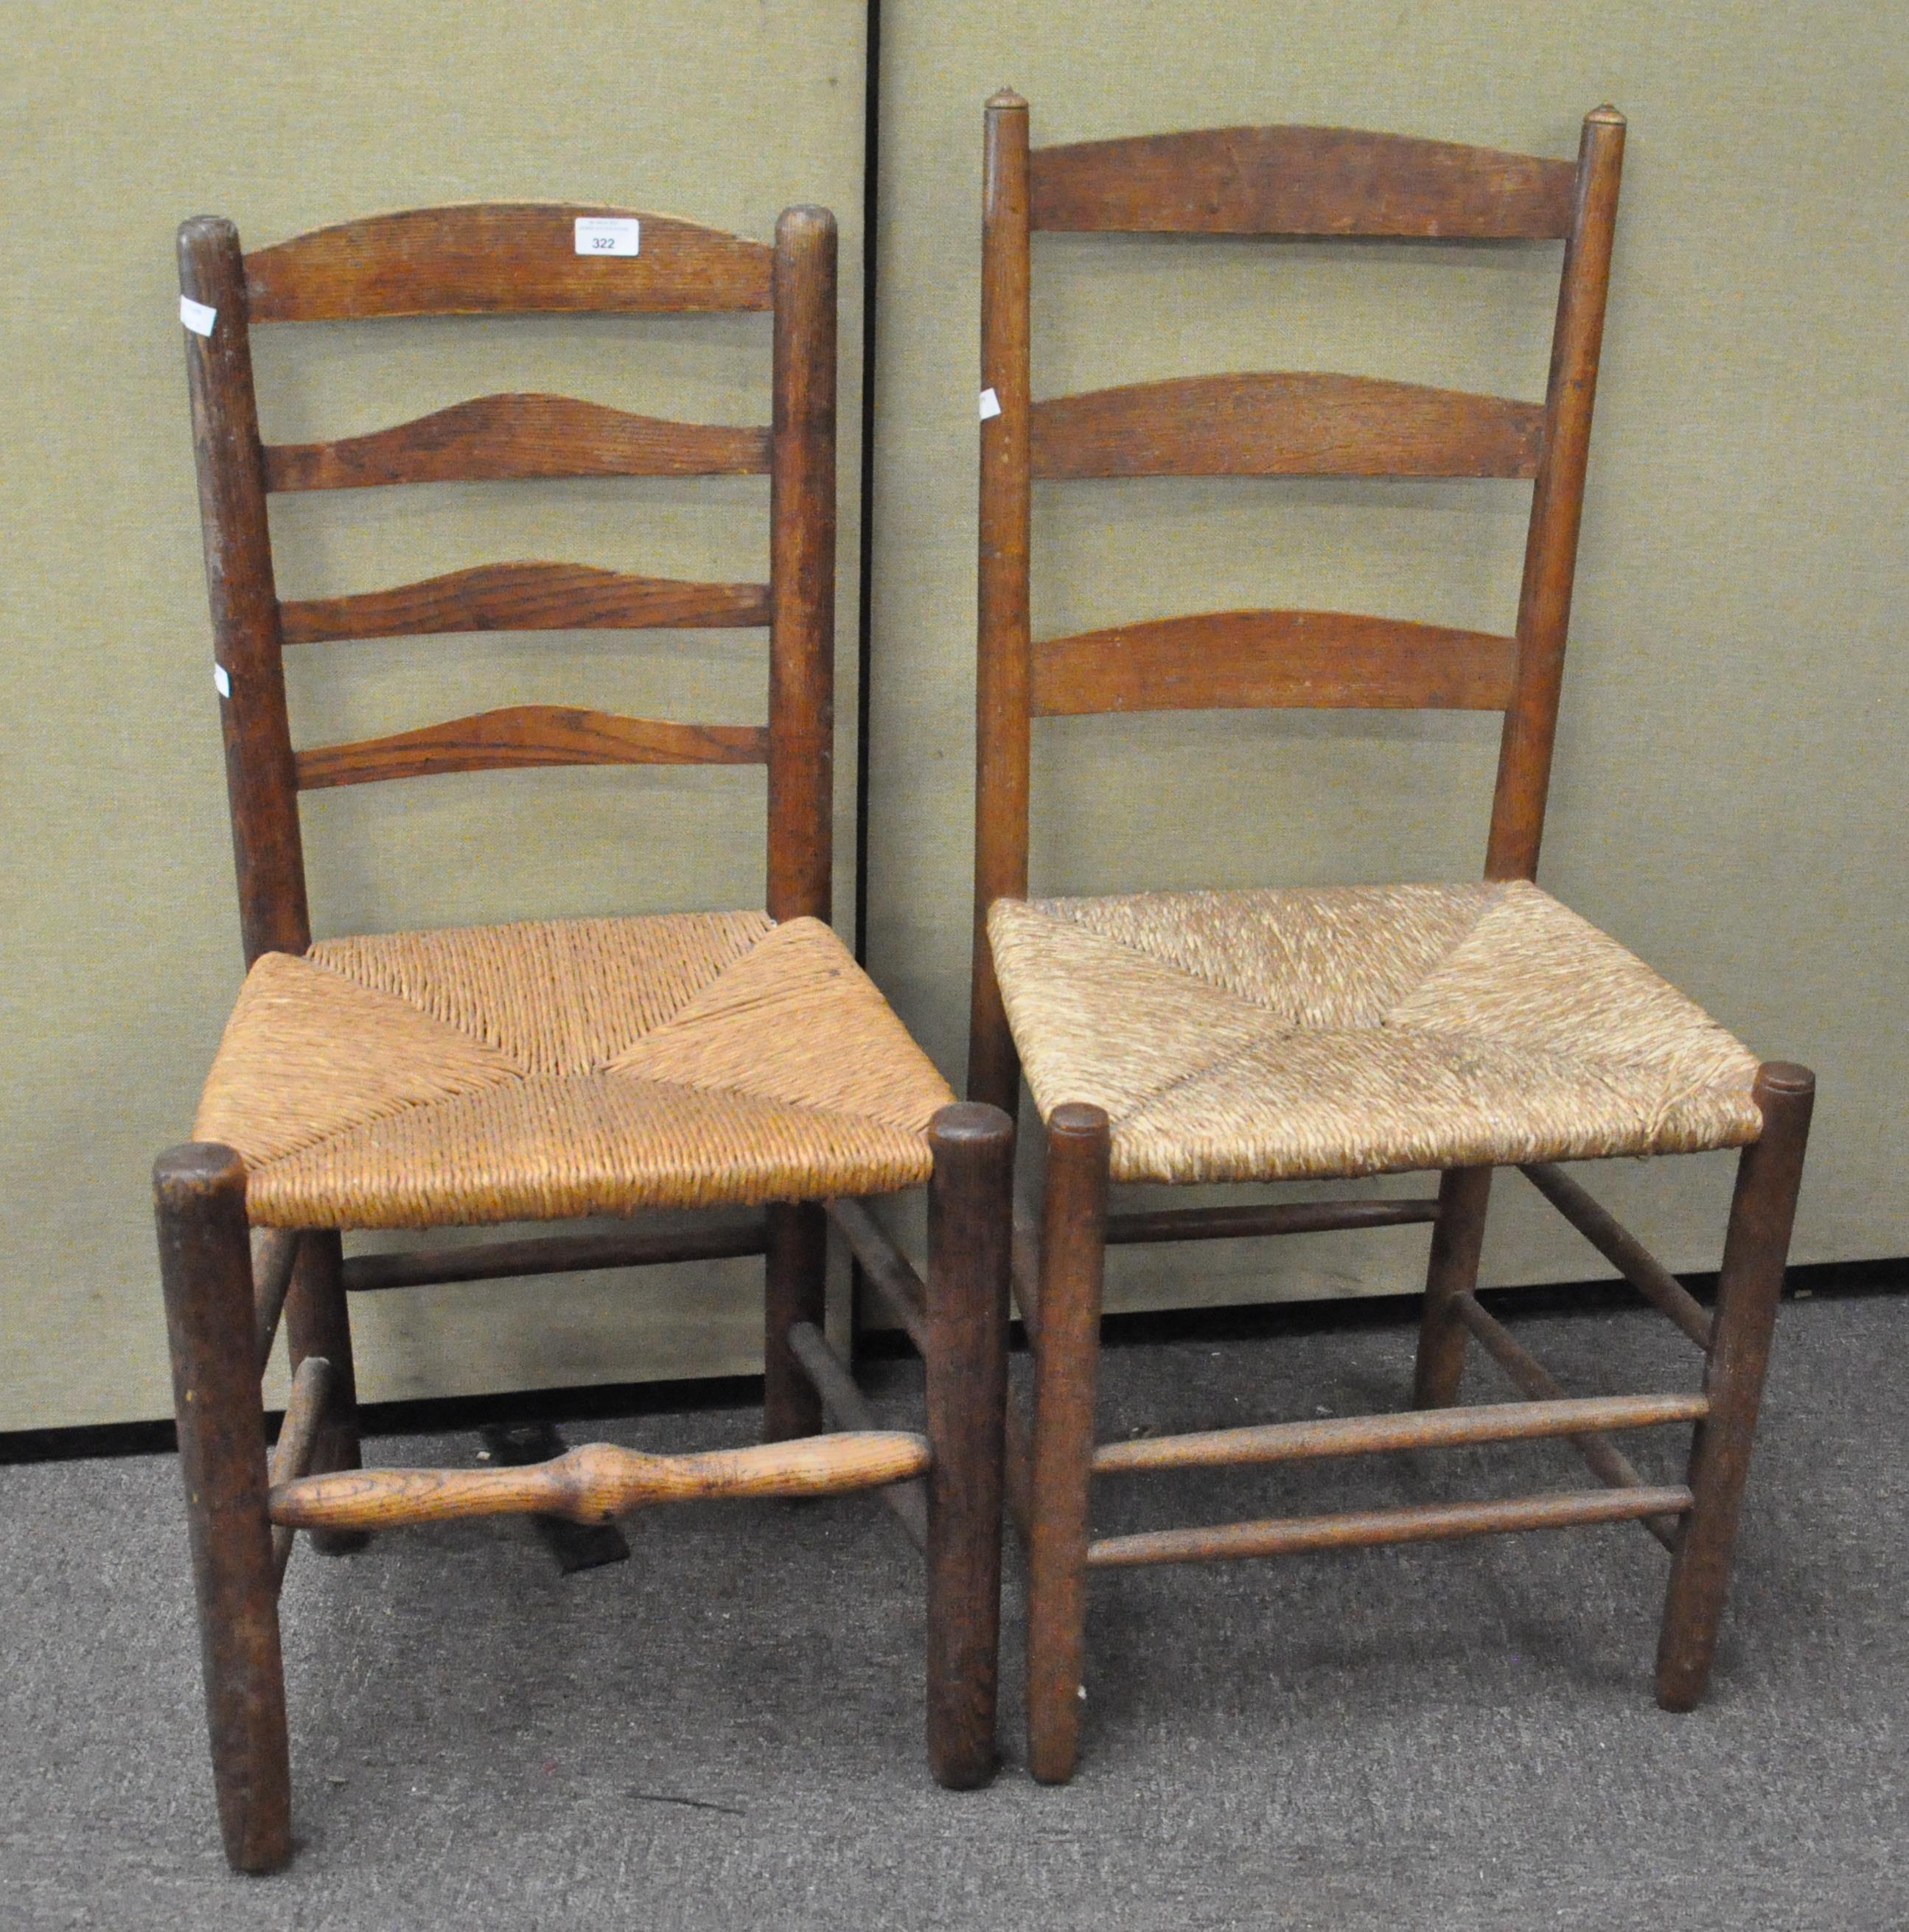 A set of two early 20th century rattan seated ladderback chairs,